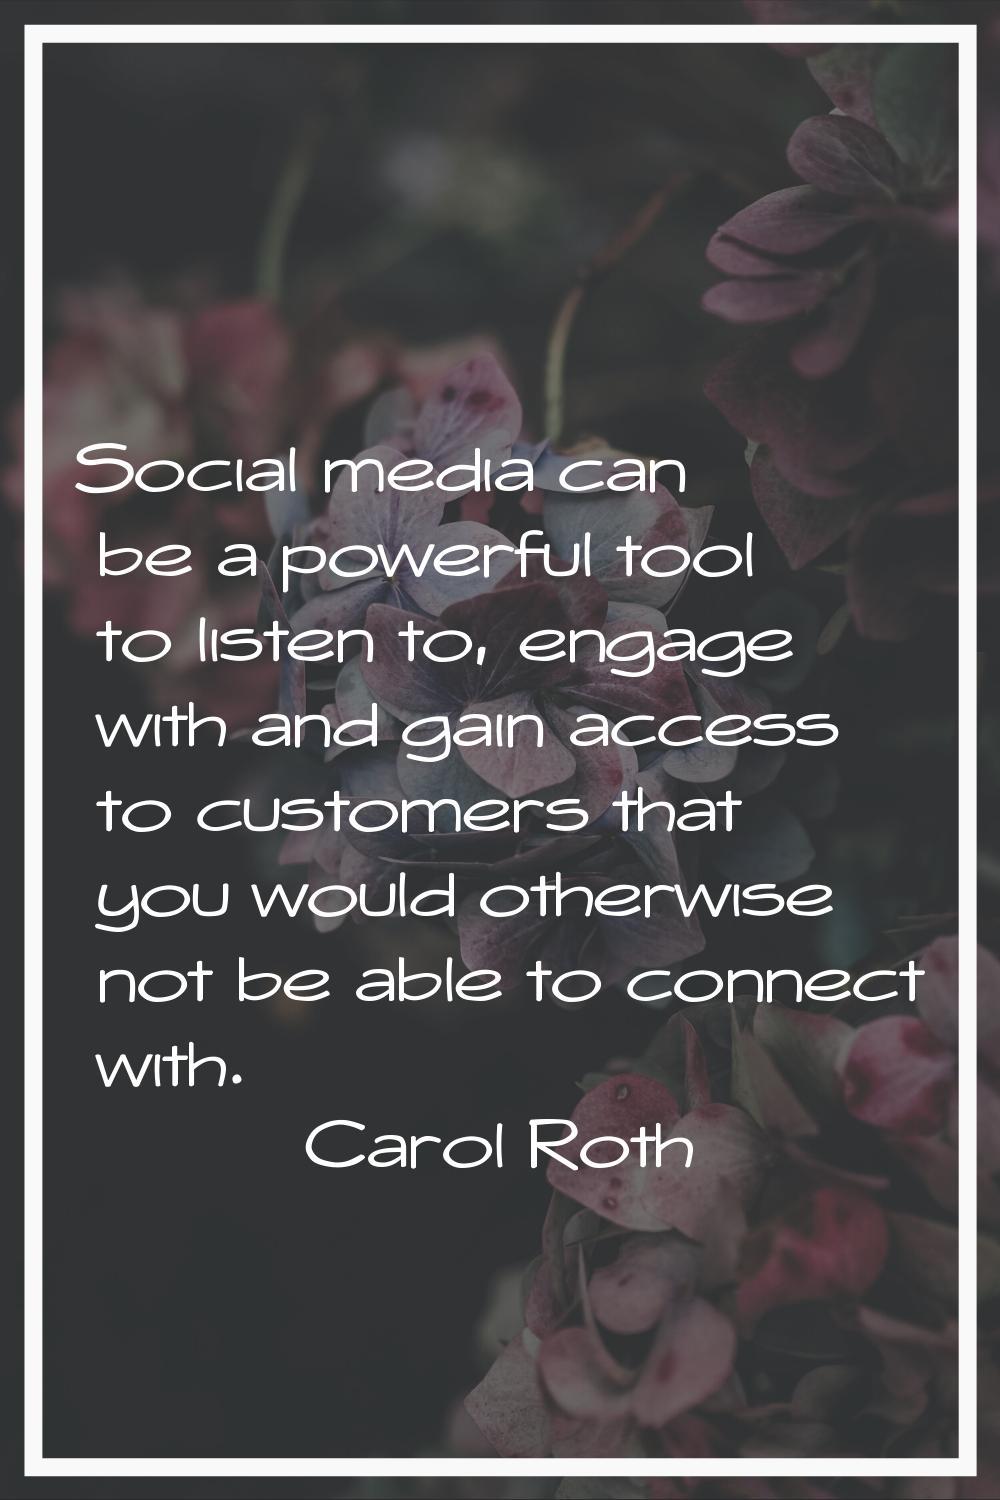 Social media can be a powerful tool to listen to, engage with and gain access to customers that you